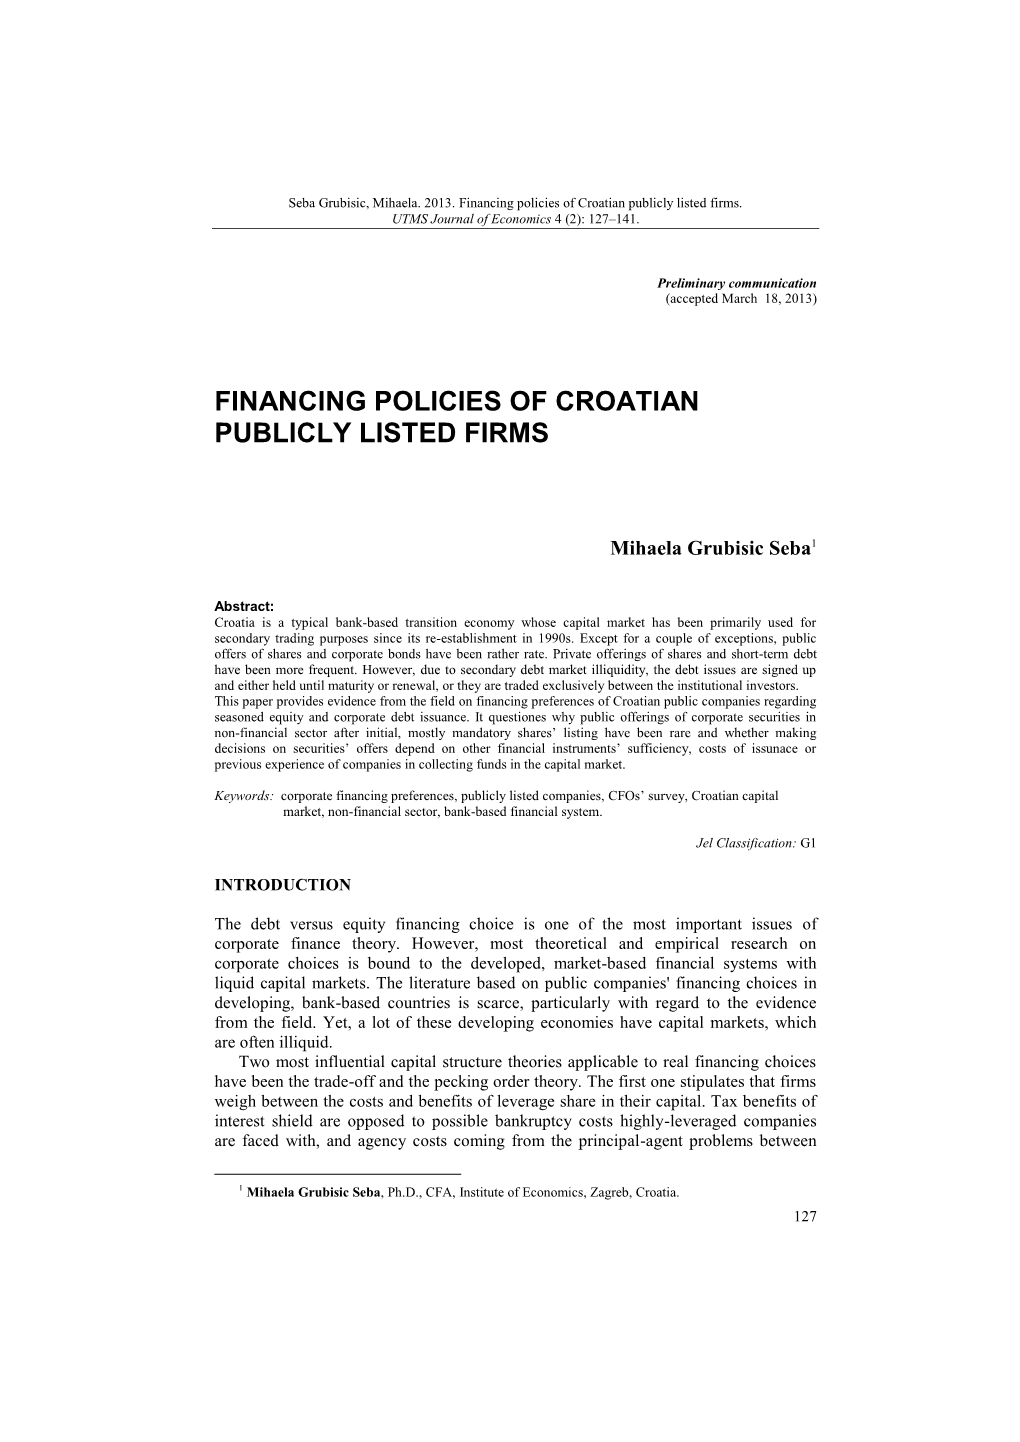 Financing Policies of Croatian Publicly Listed Firms